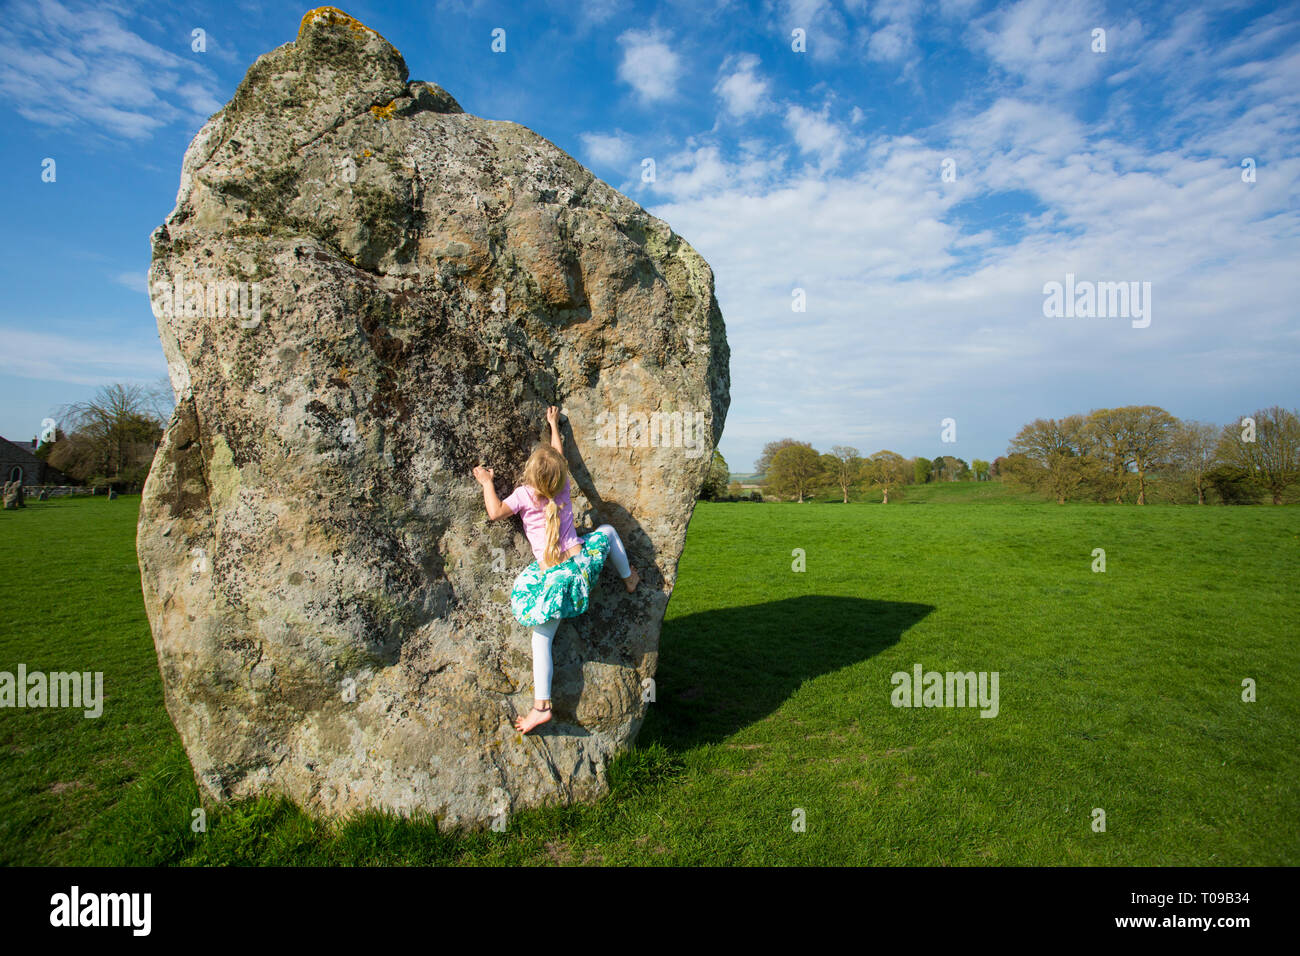 Great Britain, England, Avebury Stone Circle. Young girl climbing a huge Neolithic megalith. MR. Stock Photo